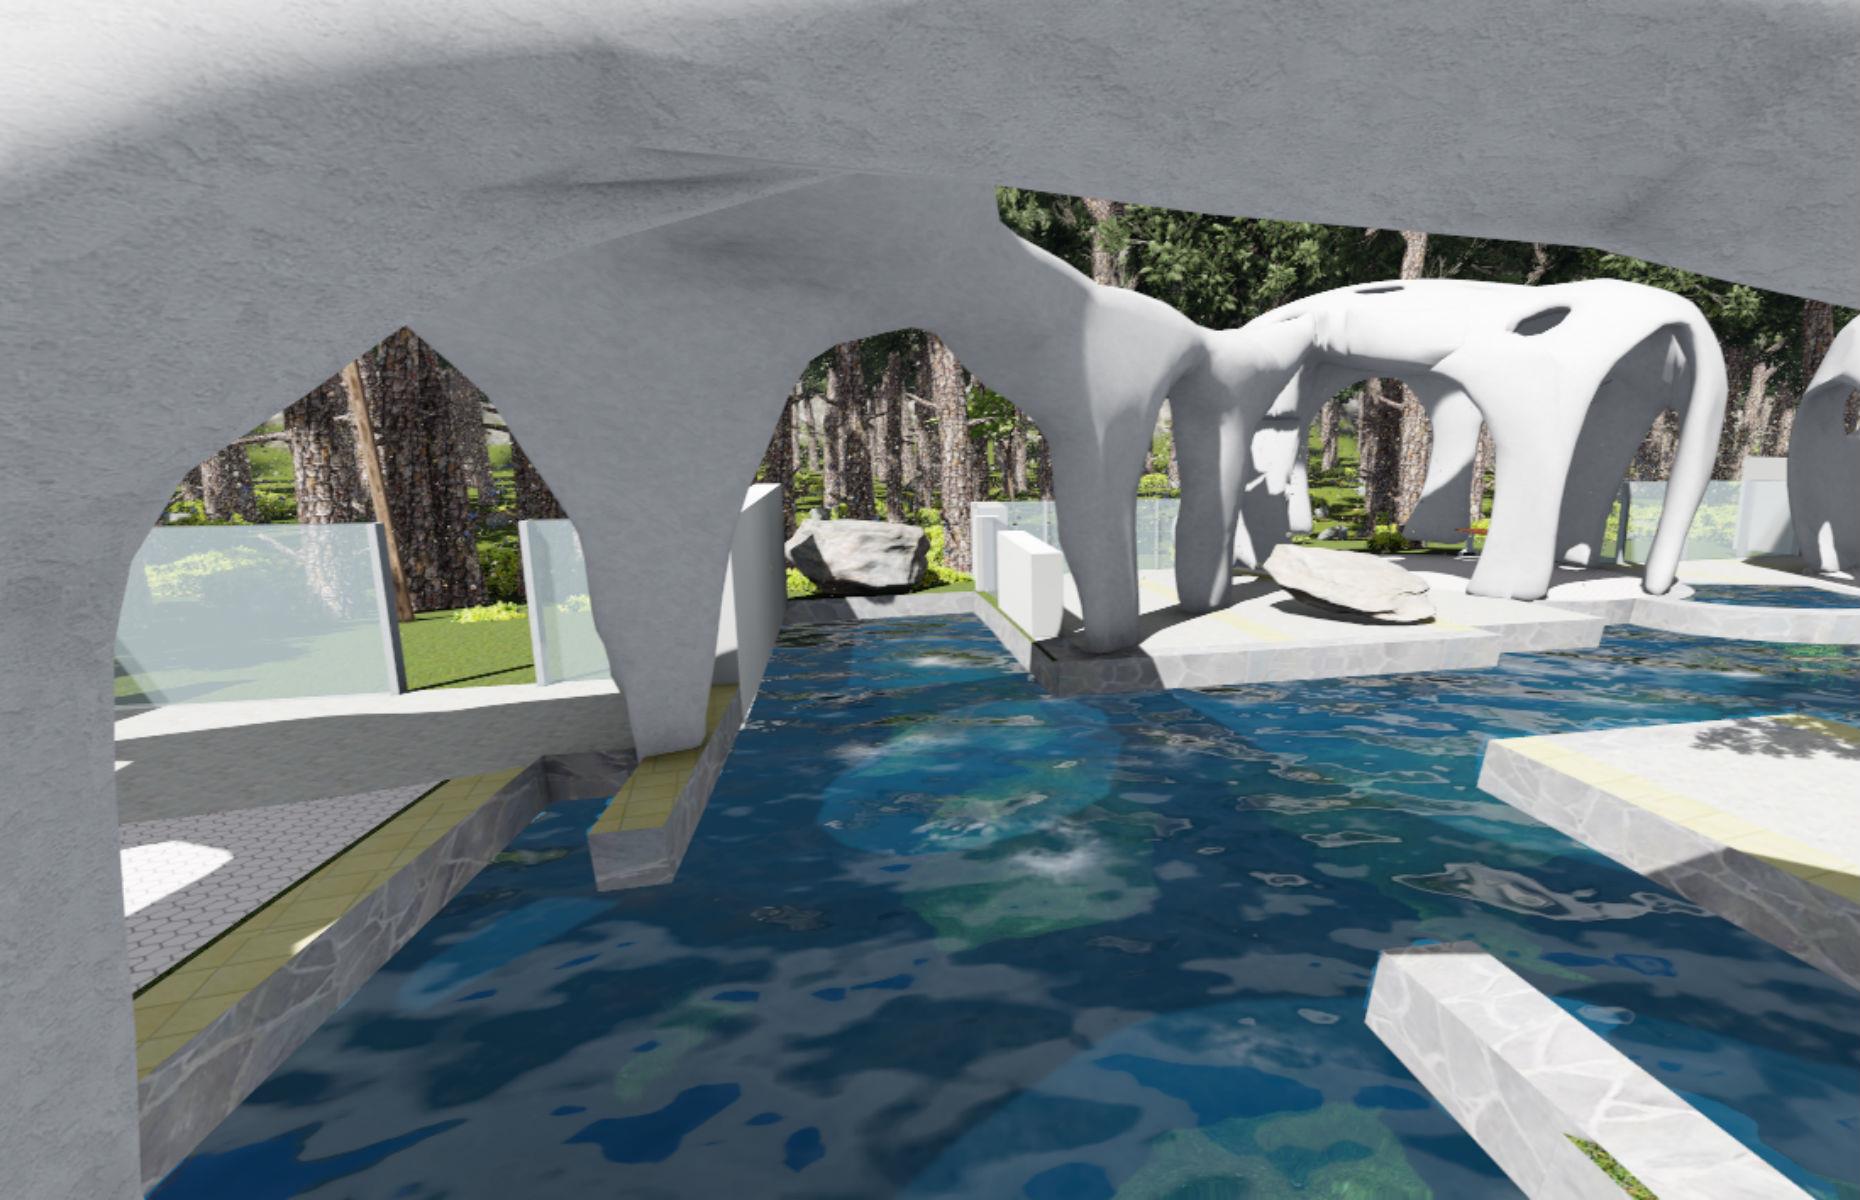 <p>The avant-garde structure was inspired by the rural landscapes of upstate New York. For example, the pool's quirky architecture takes its cue from the area's distinctive rock formations. It might not be long until this modern masterpiece is realized either, as the house is currently being printed in a facility in New Hampshire. Watch this space!</p>